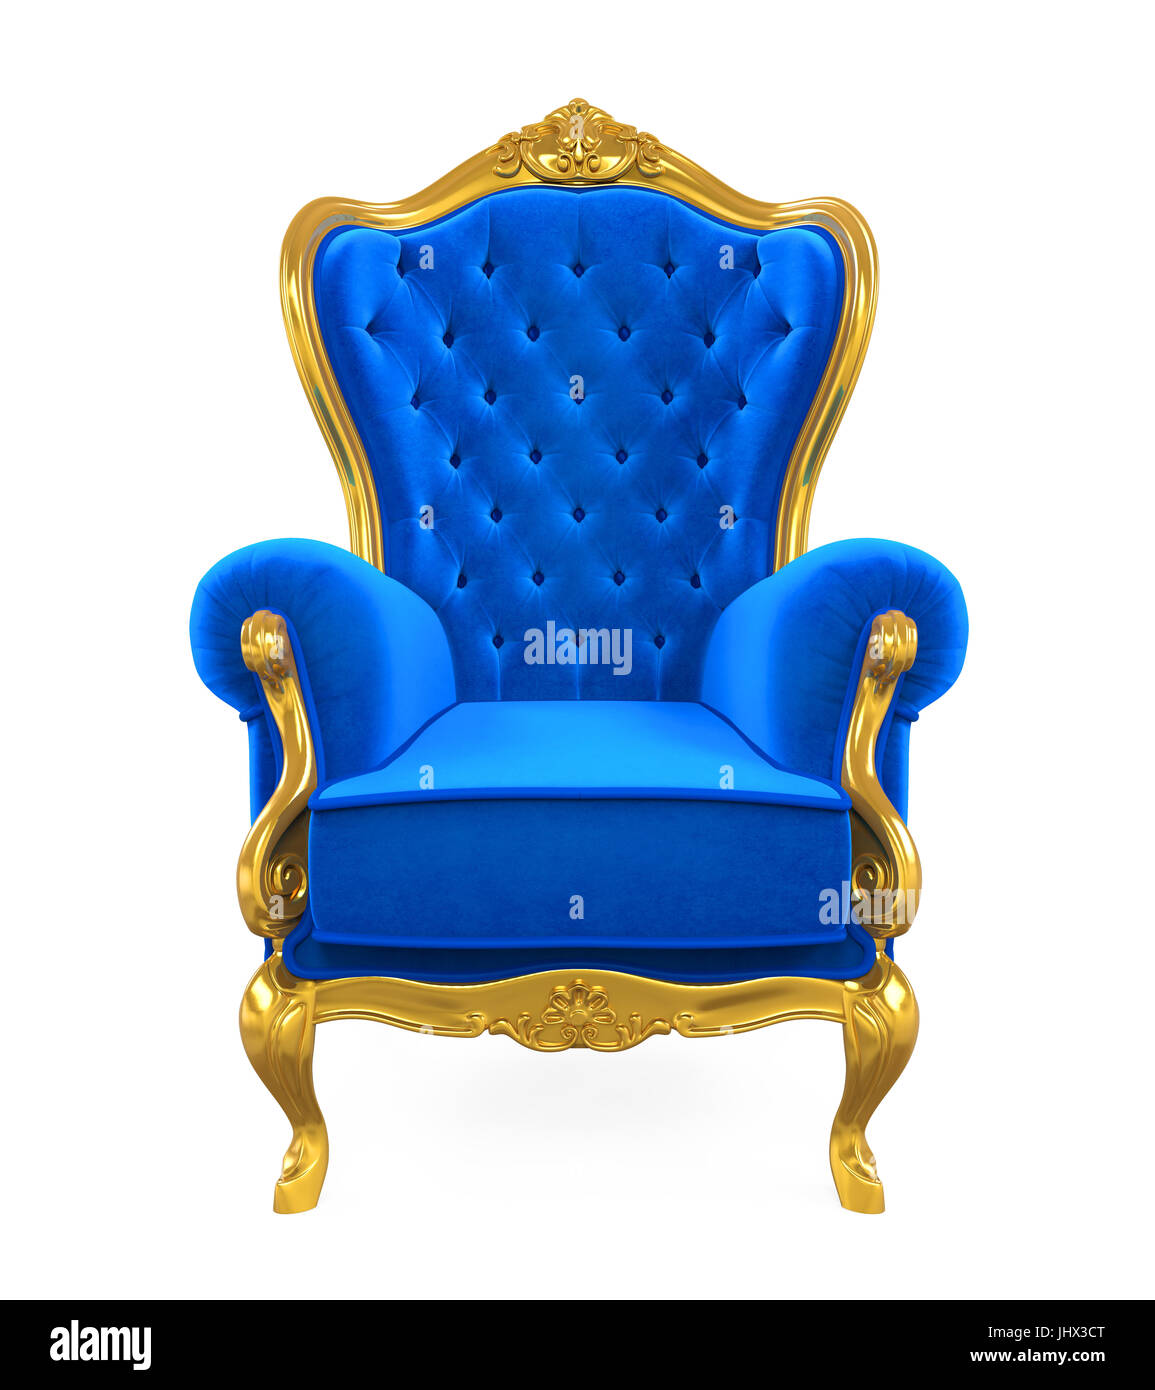 Blue Throne Chair Isolated Stock Photo